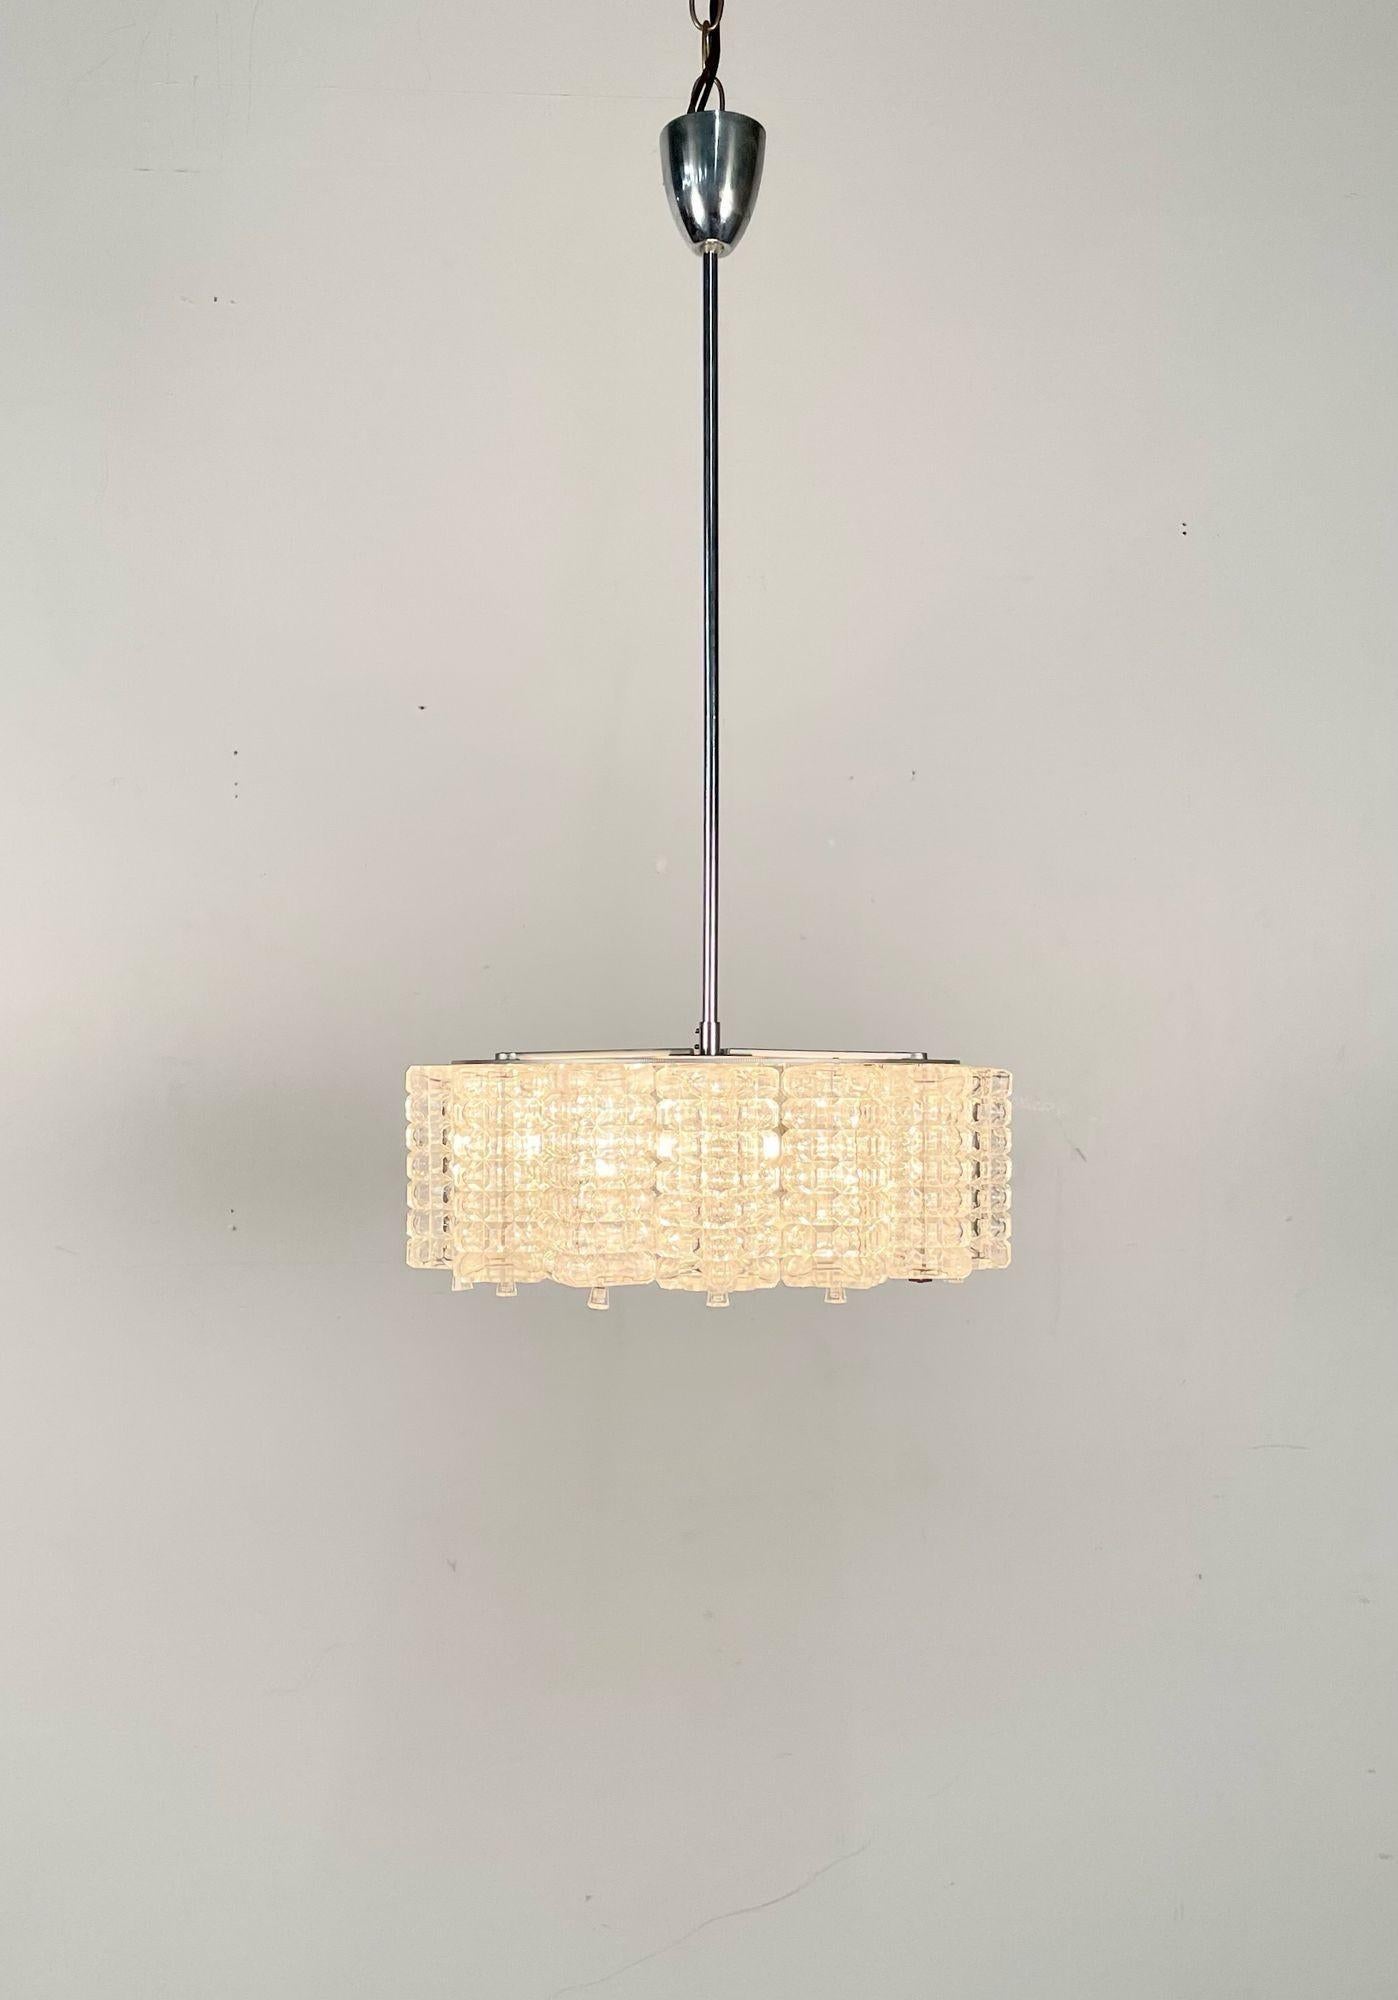 Art Deco, Chandelier, Textured Glass, Chrome, Sweden, Circa 1930s

Circular in form having five lights. Center pole can be added to or cut down to reduce or add size.

Textured Glass, Chrome
Sweden, 1930s

27.5 h x 14.25 dia